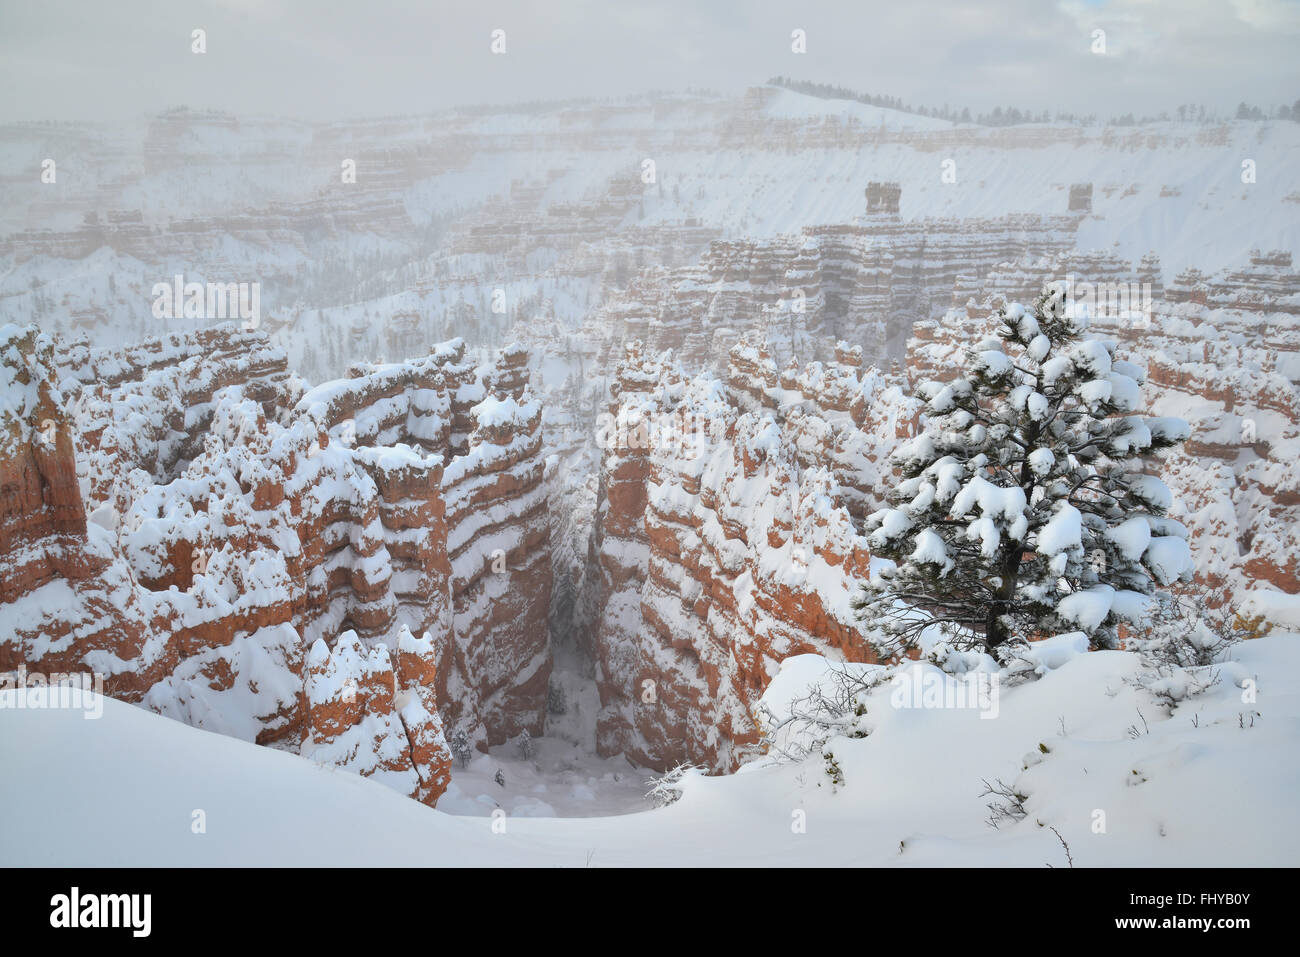 Silent City of Bryce Canyon National Park after a snow storm as seen from the Rim Trail near Sunset Point. Bryce is in SE Utah. Stock Photo